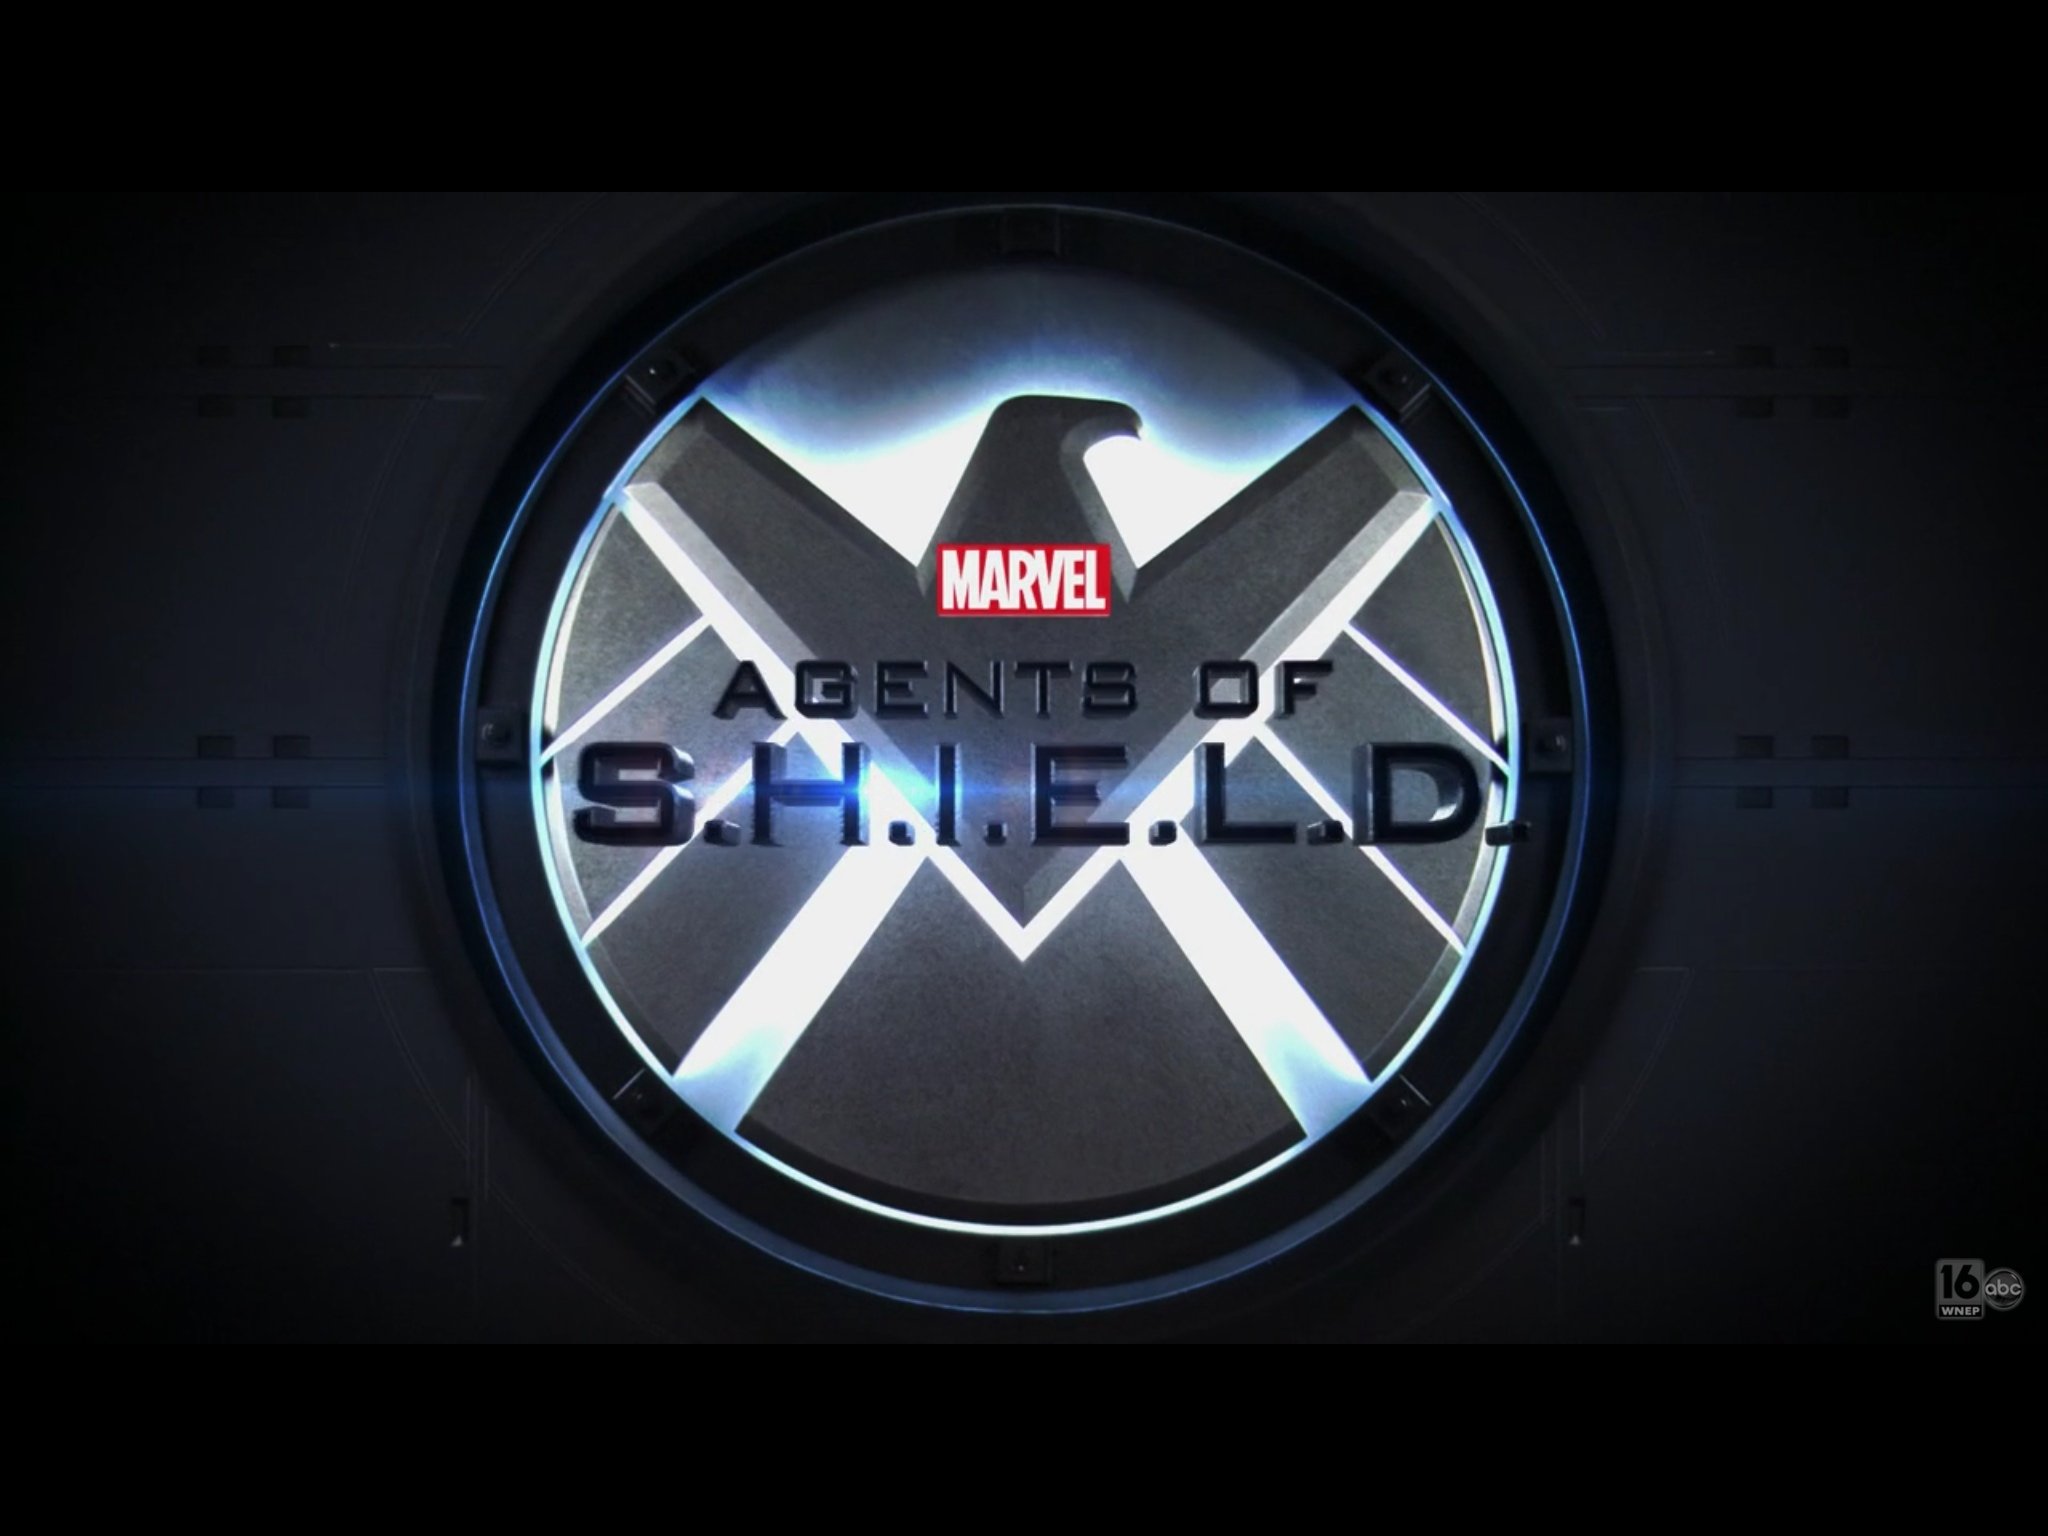 AGENTS OF SHIELD action drama sci fi marvel comic series